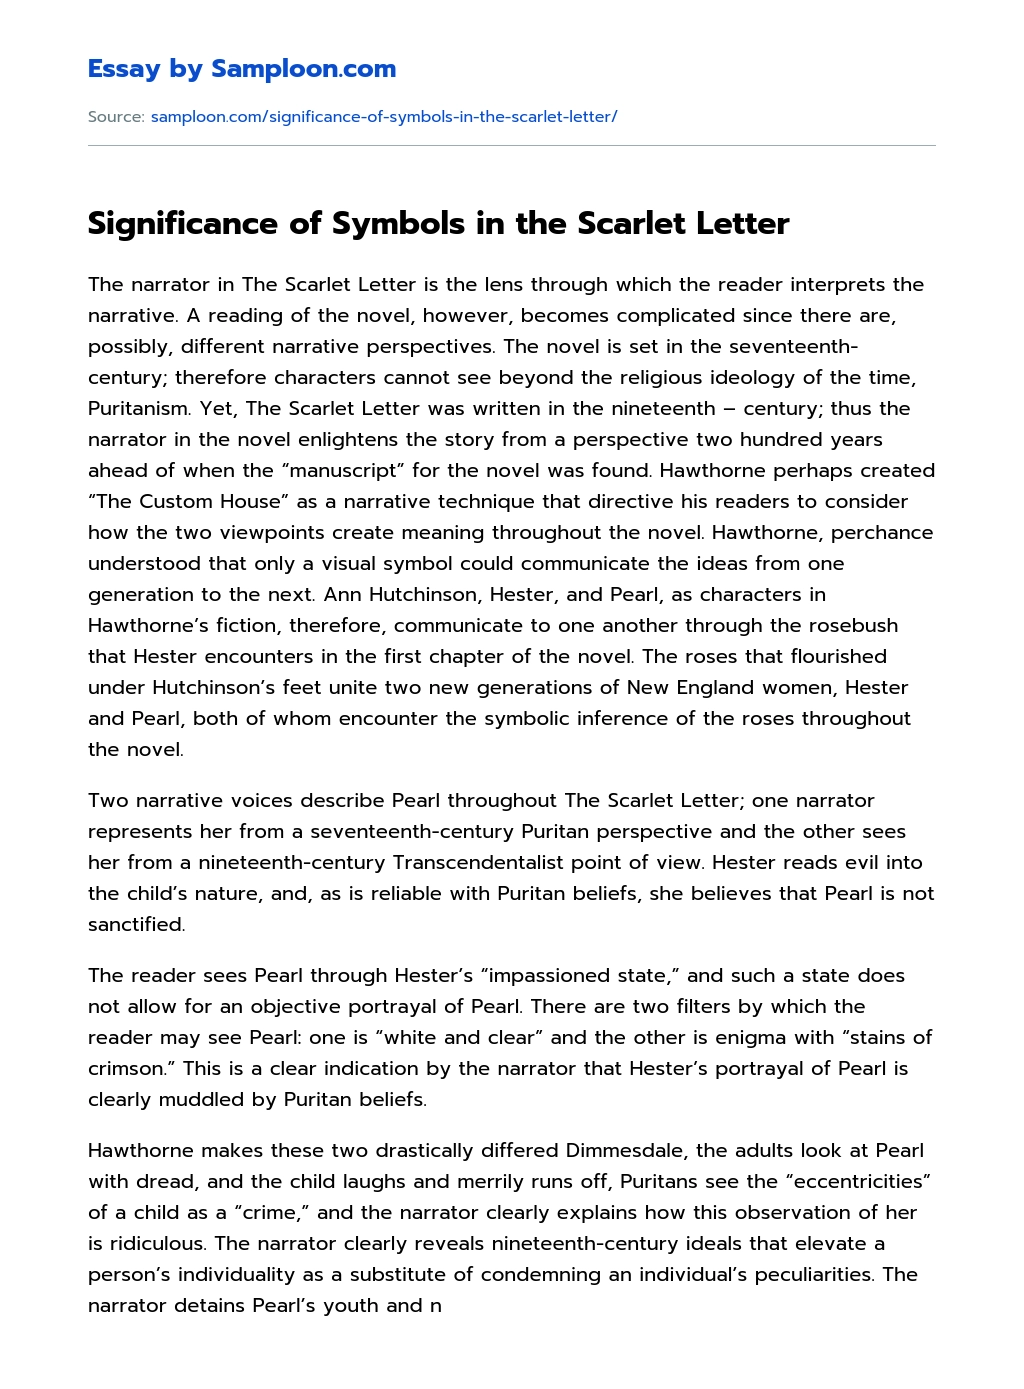 Significance of Symbols in the Scarlet Letter essay